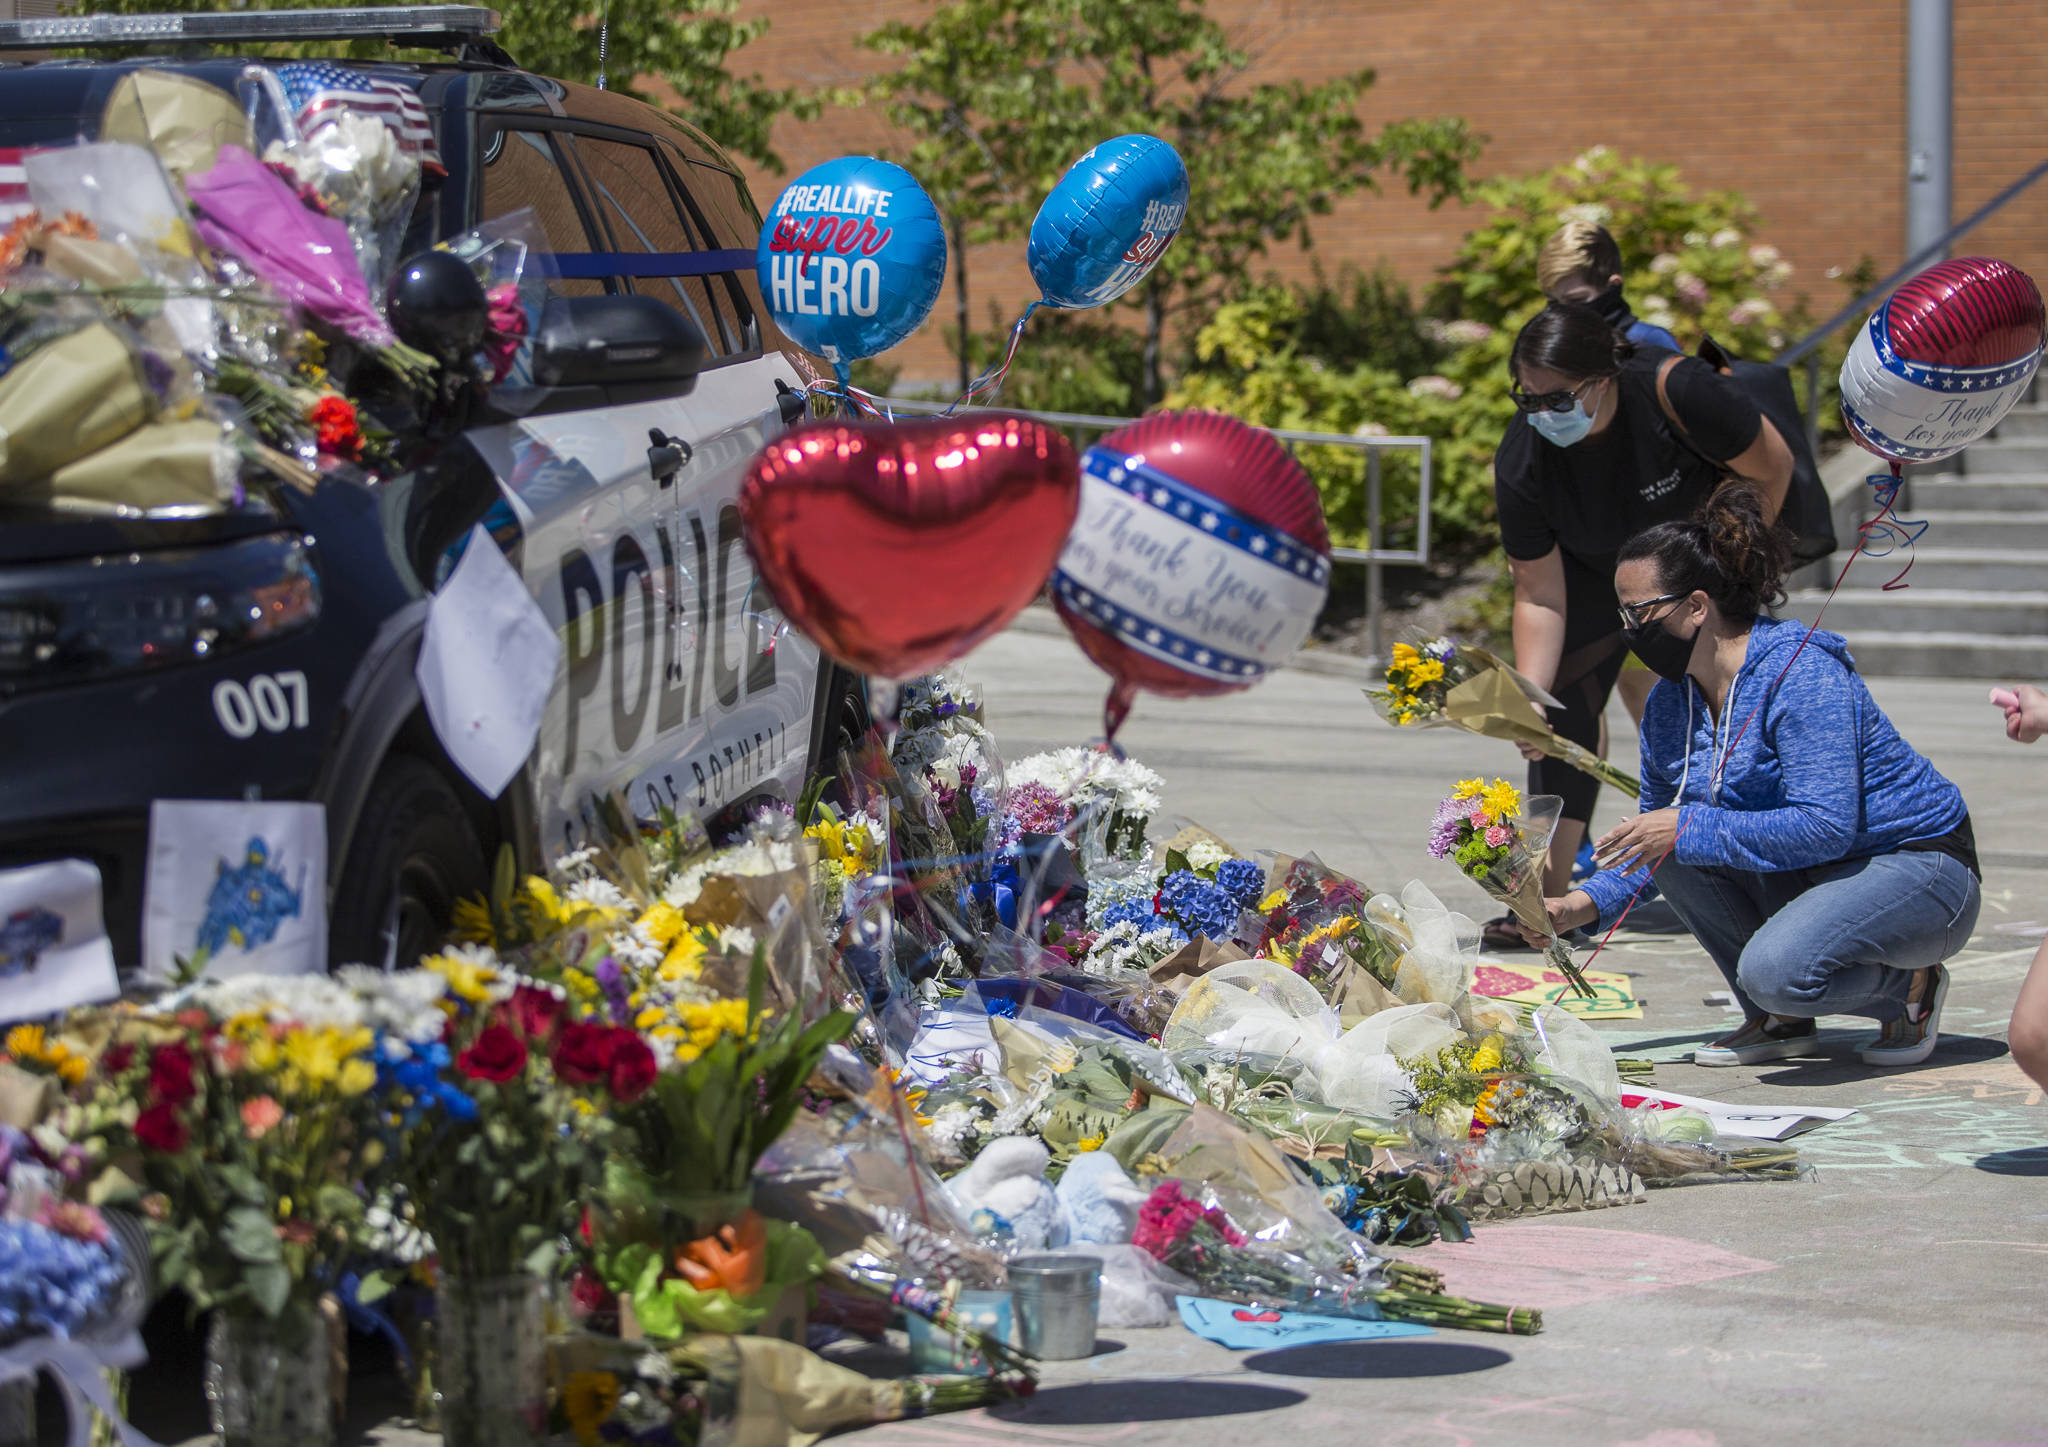 People place flowers at a memorial in front of Bothell City Hall on Tuesday for Officer Jonathan Shoop, who was killed in the line of duty Monday night. (Olivia Vanni / The Herald)